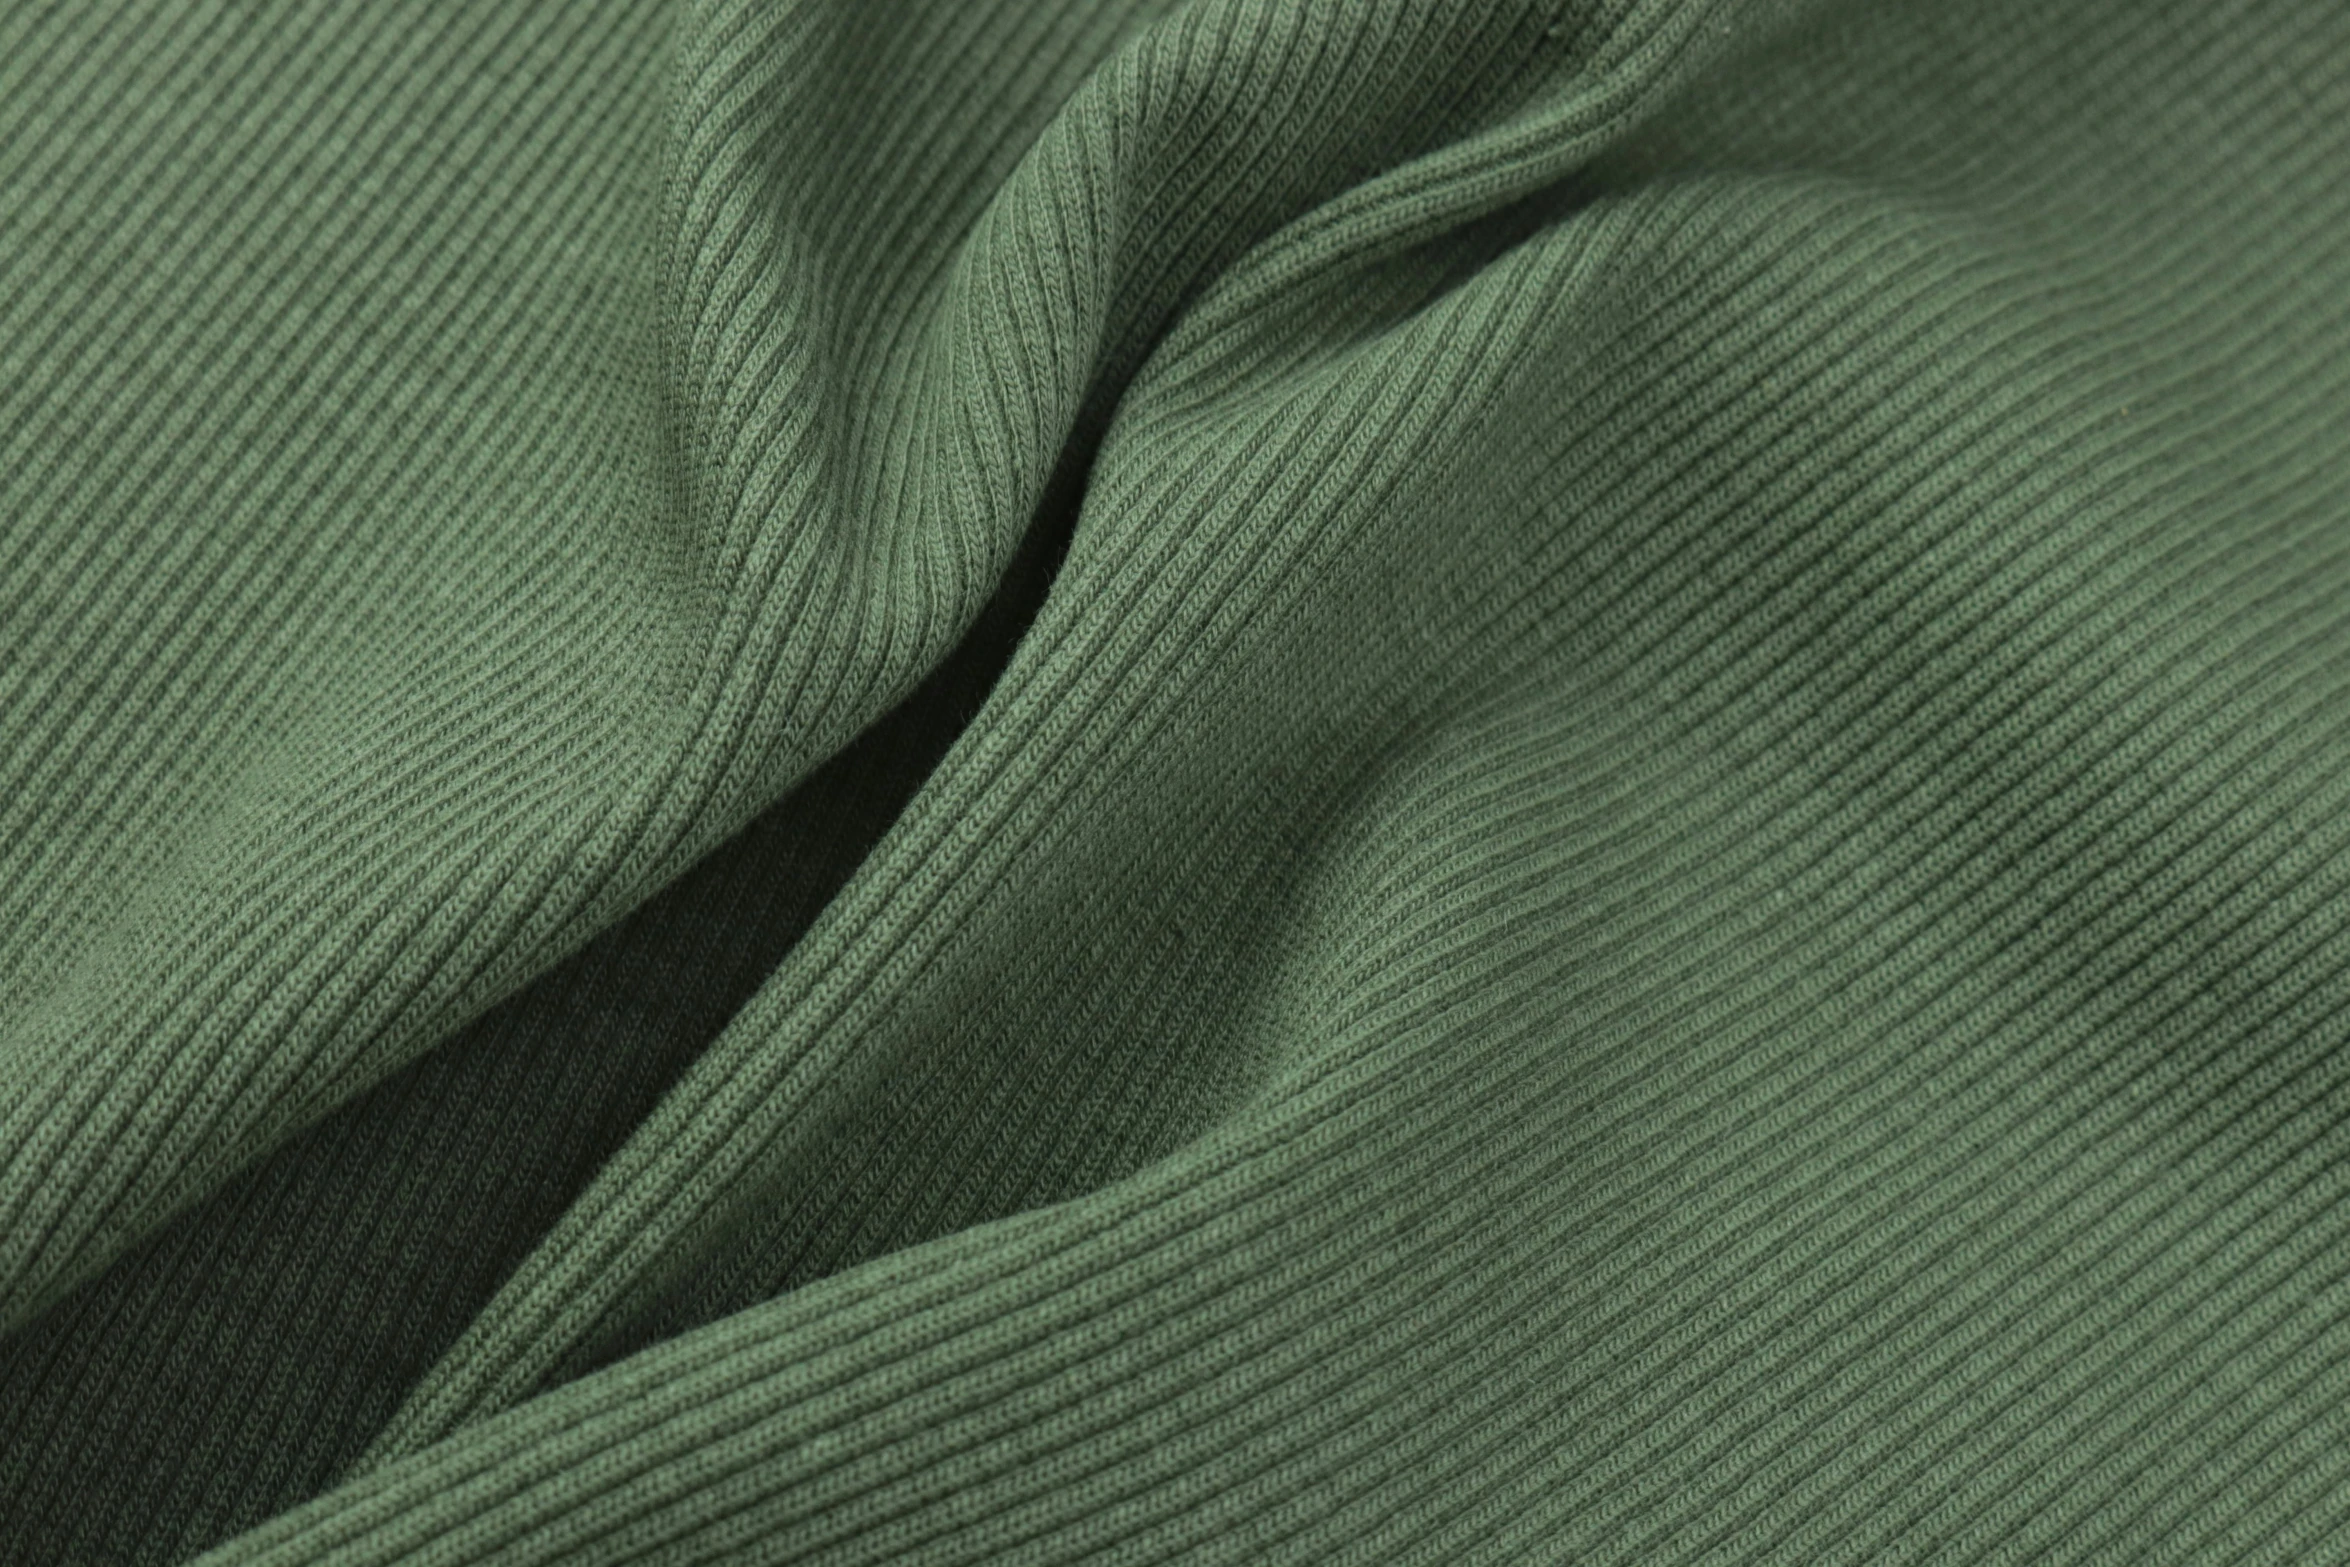 a green shirt with ons and an extended tie